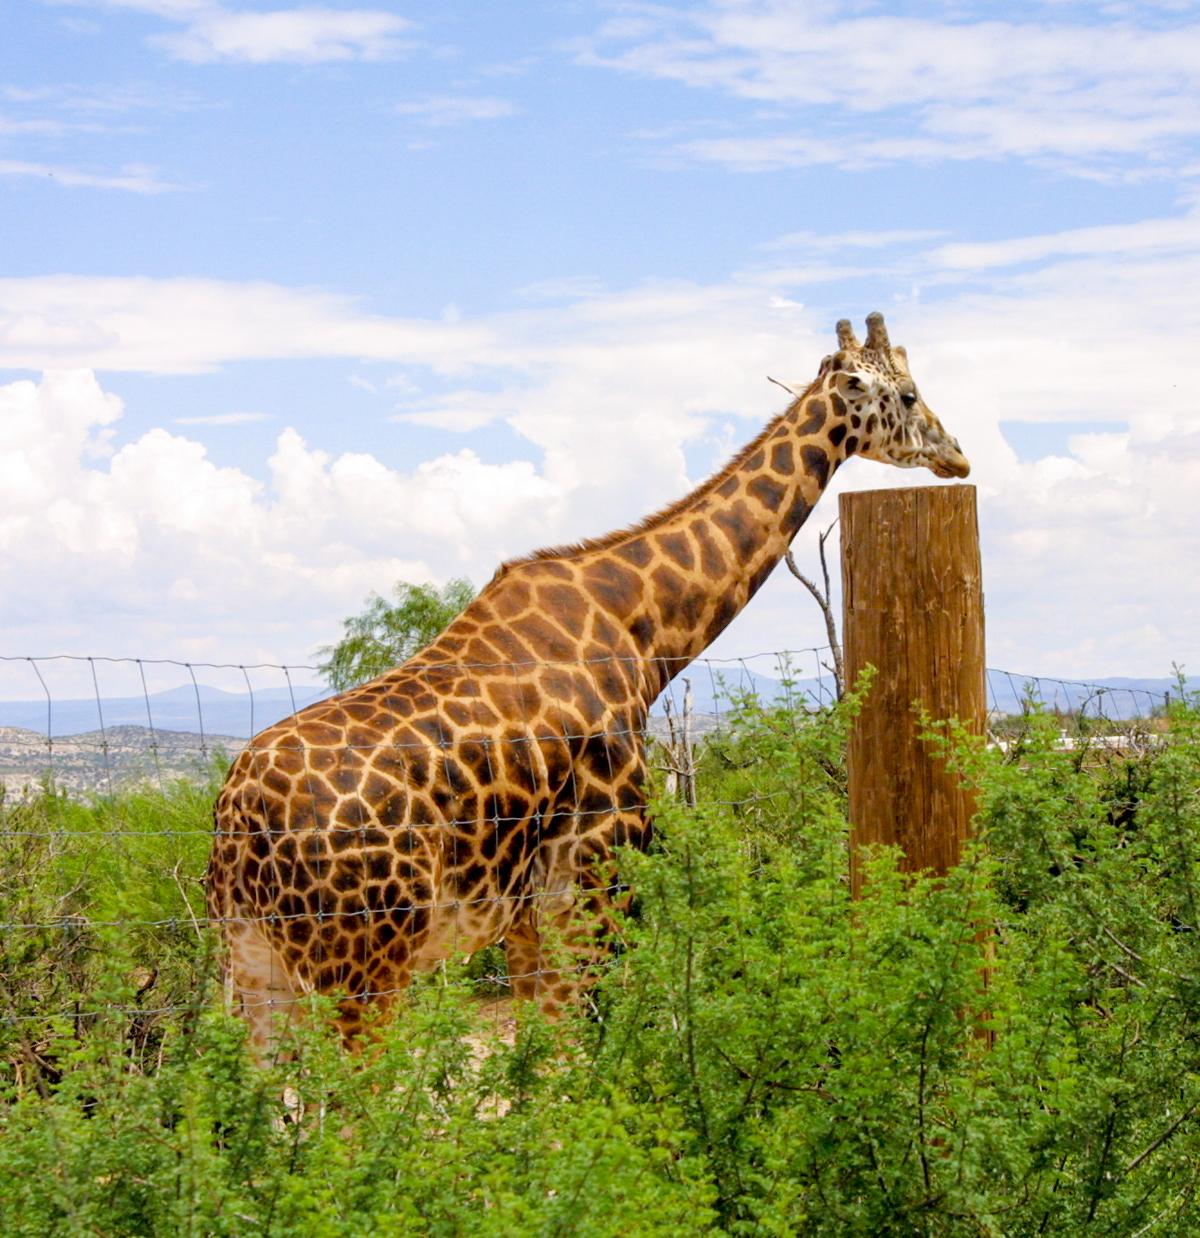 A giraffe at the Out of Africa Preserve (Courtesy of Michelle Sutter)